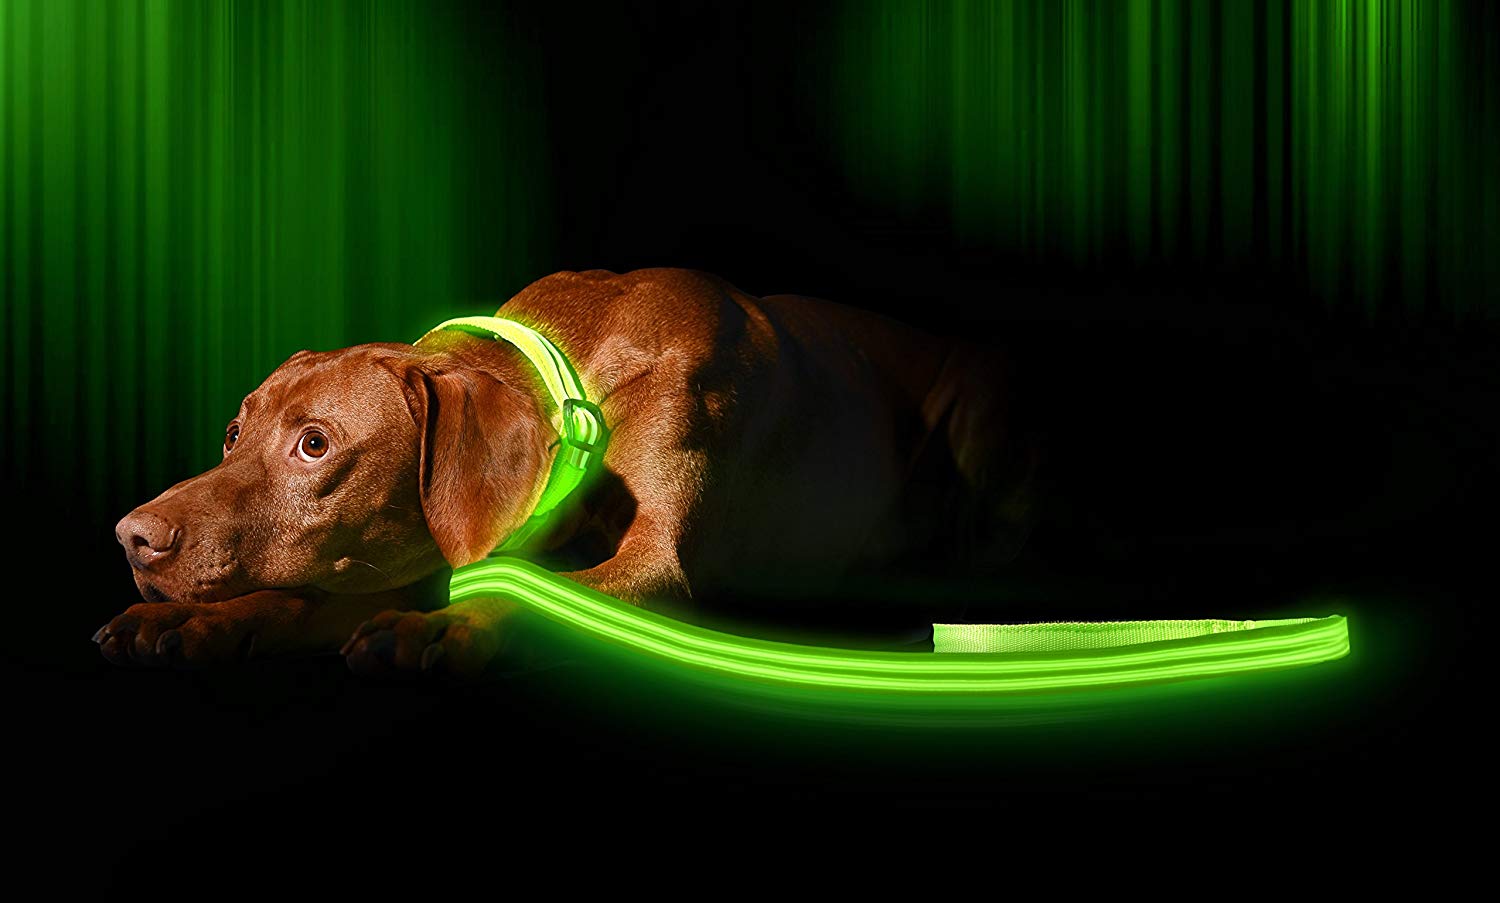 Illumiseen LED Dog Leash - USB Rechargeable - Available in 6 Colors & 2 Sizes - Makes Your Dog Visible, Safe & Seen 1